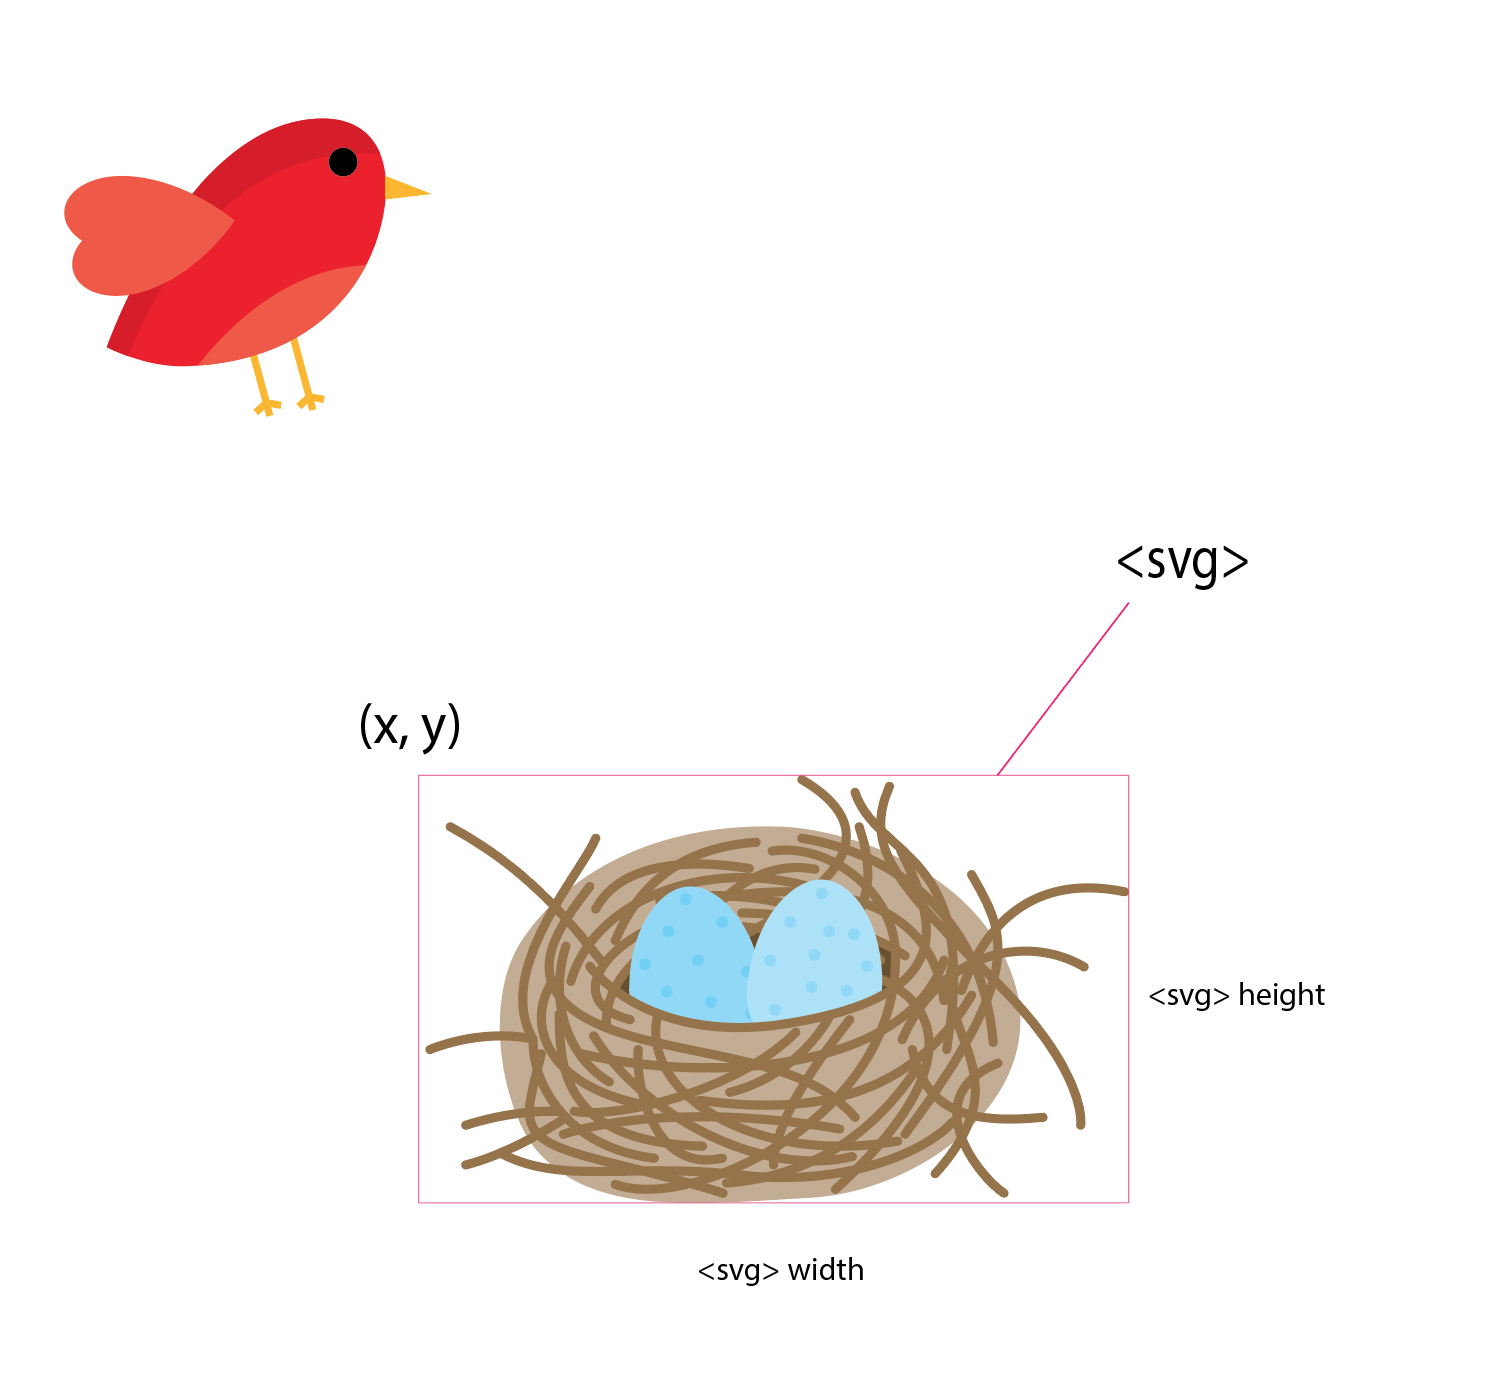 A visual respresentation of the nested svg element positioned on top of (or around) the nest looks like the bounding box of the nest itself.